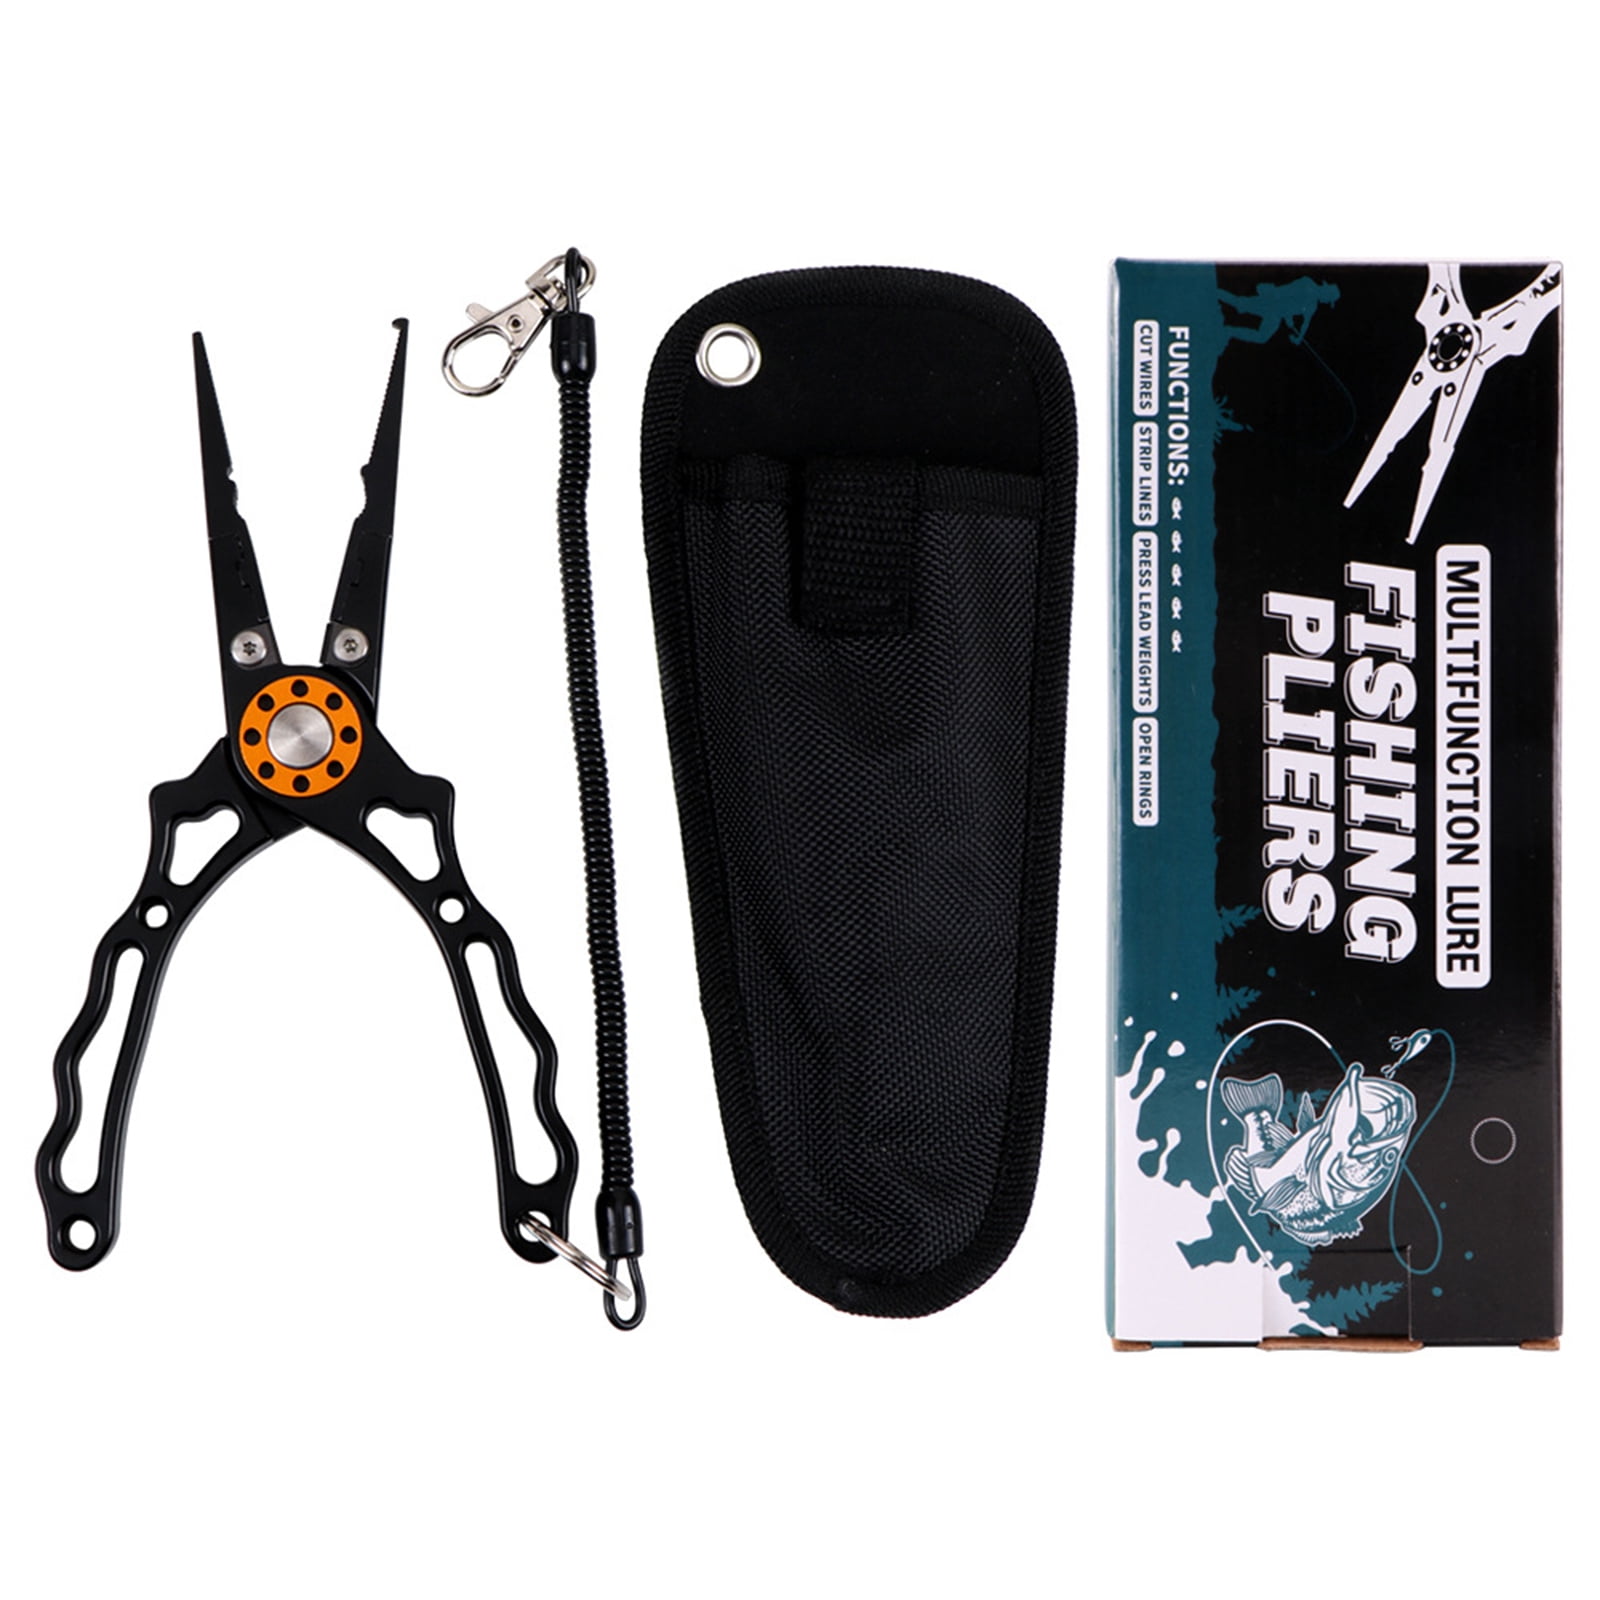 YIDEDE Split Ring Open Loop Fishing Pliers Missed Rope Tungsten Steel  Convenient To Use Multifunctional Lightweight Aluminum 